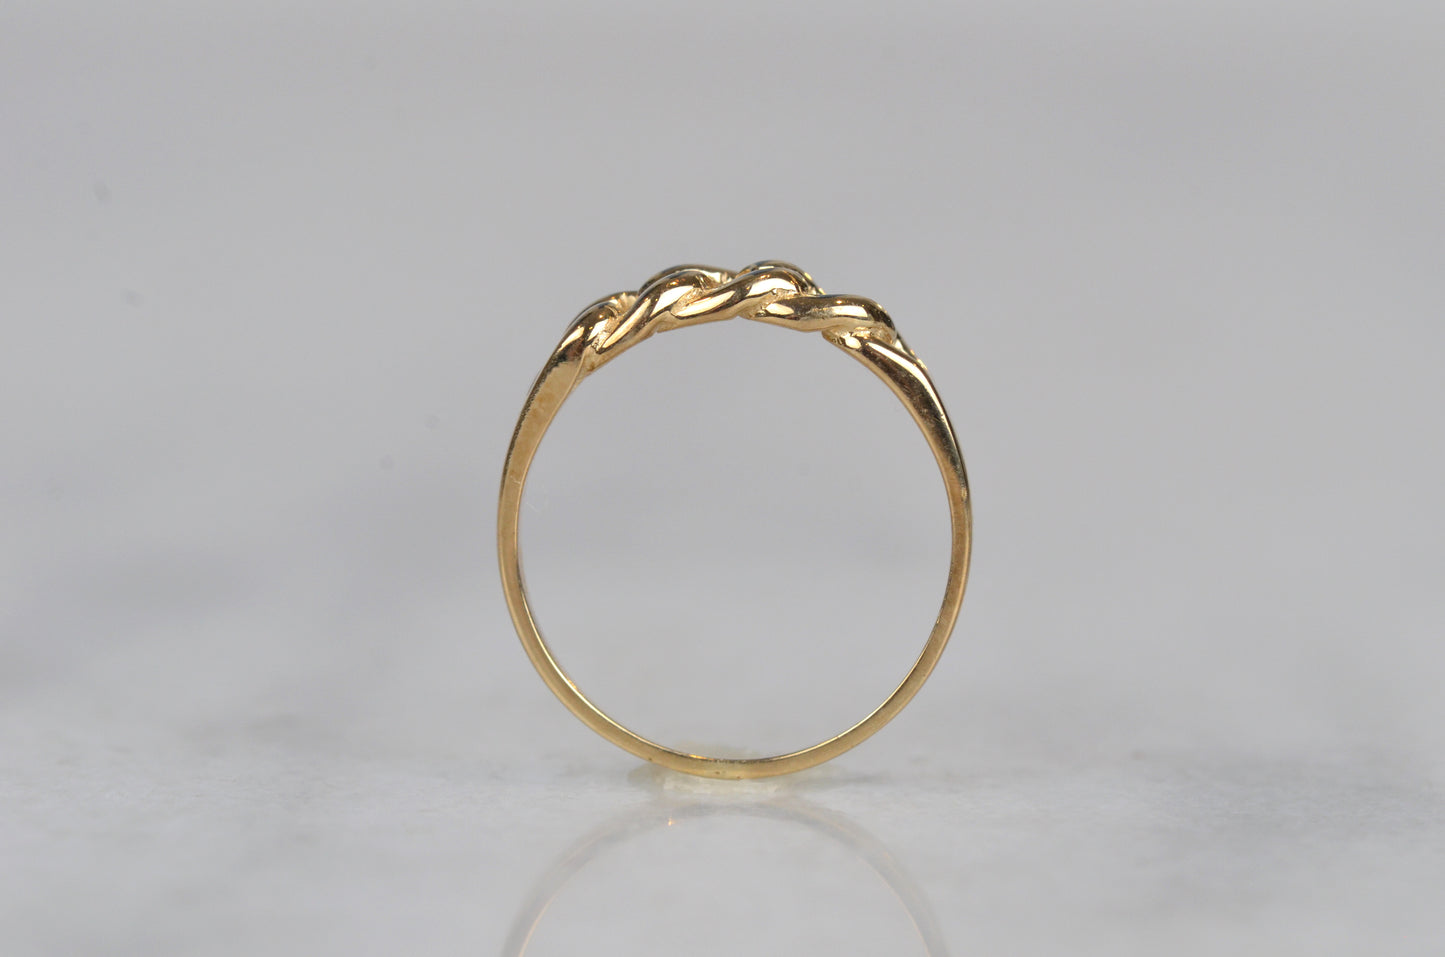 Sexy Vintage Chain Link Ring